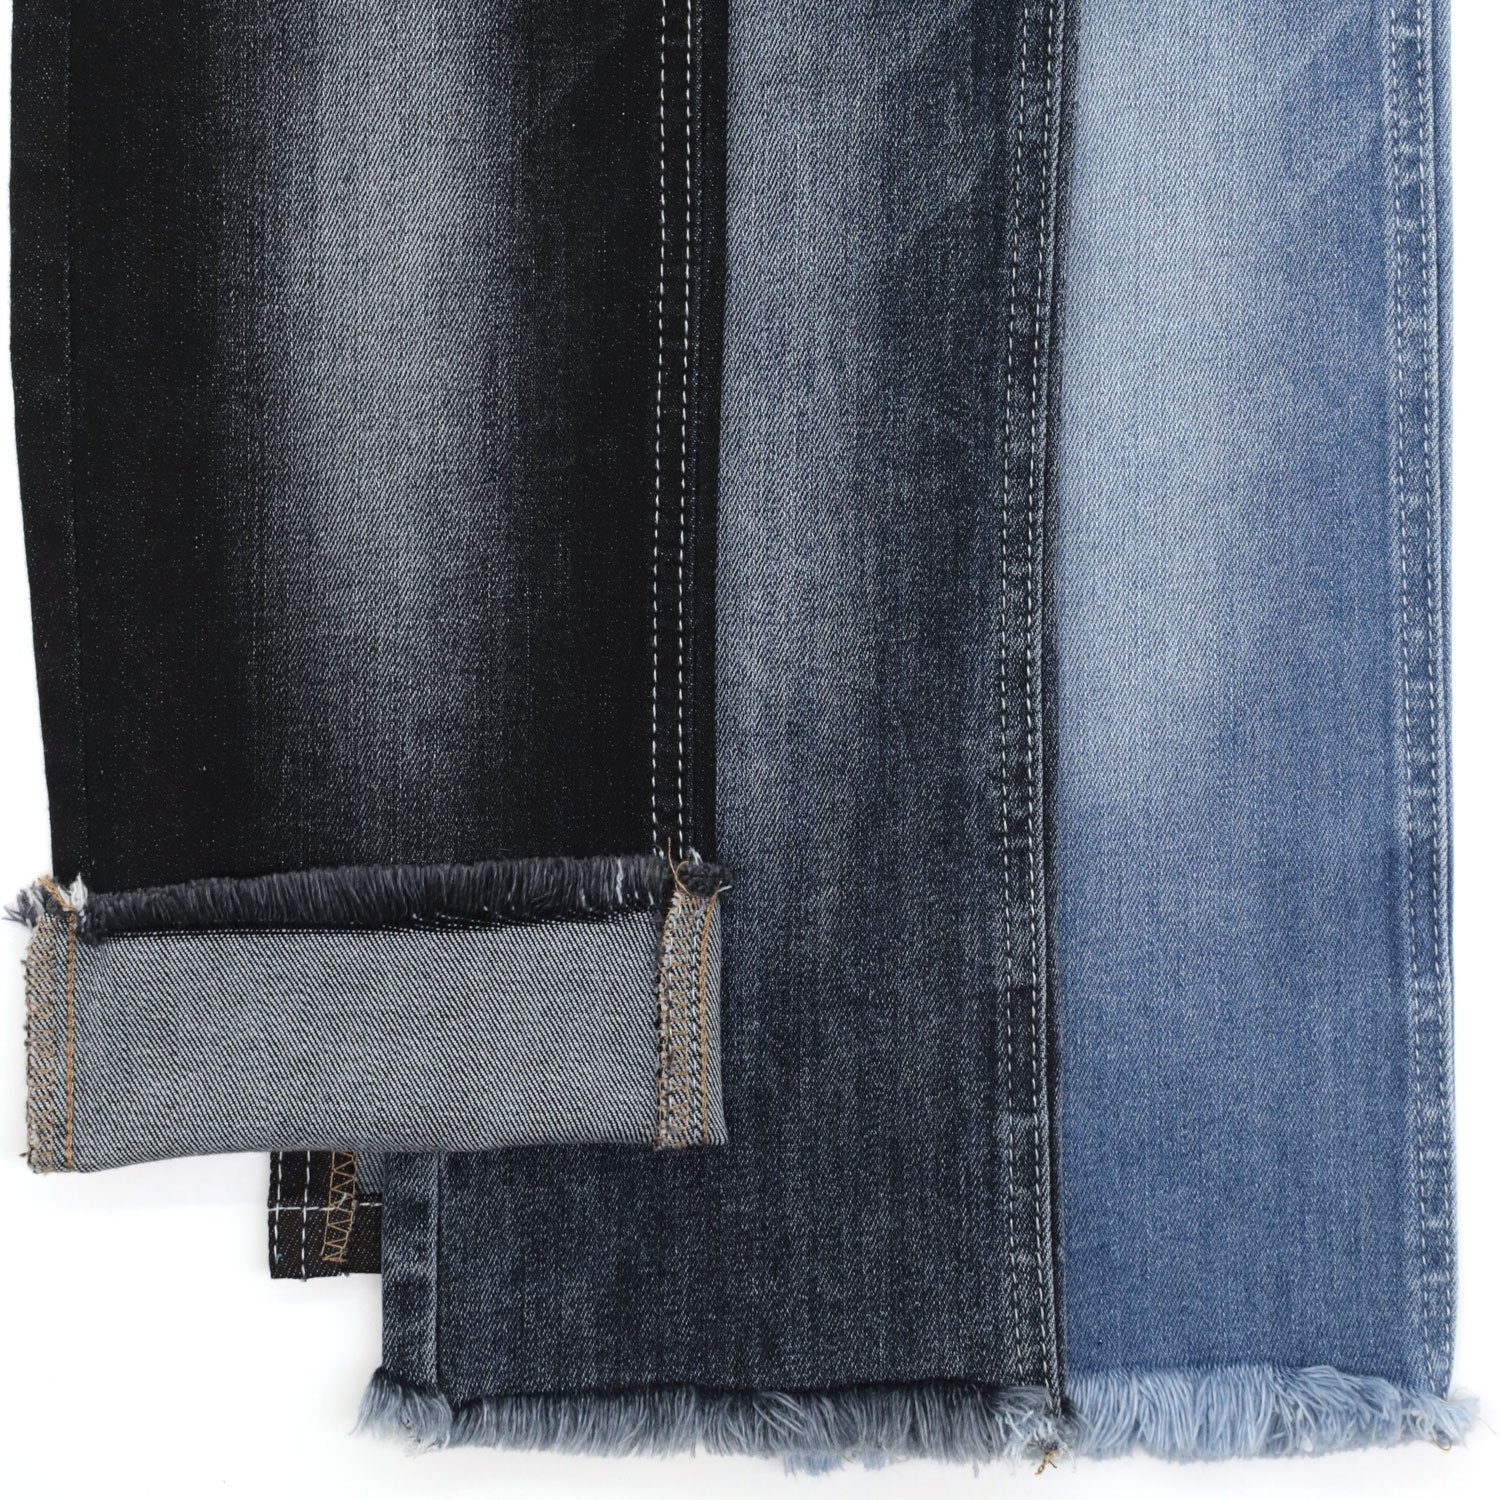 How to Use High Stretch Denim Fabric for Your New Home? 1